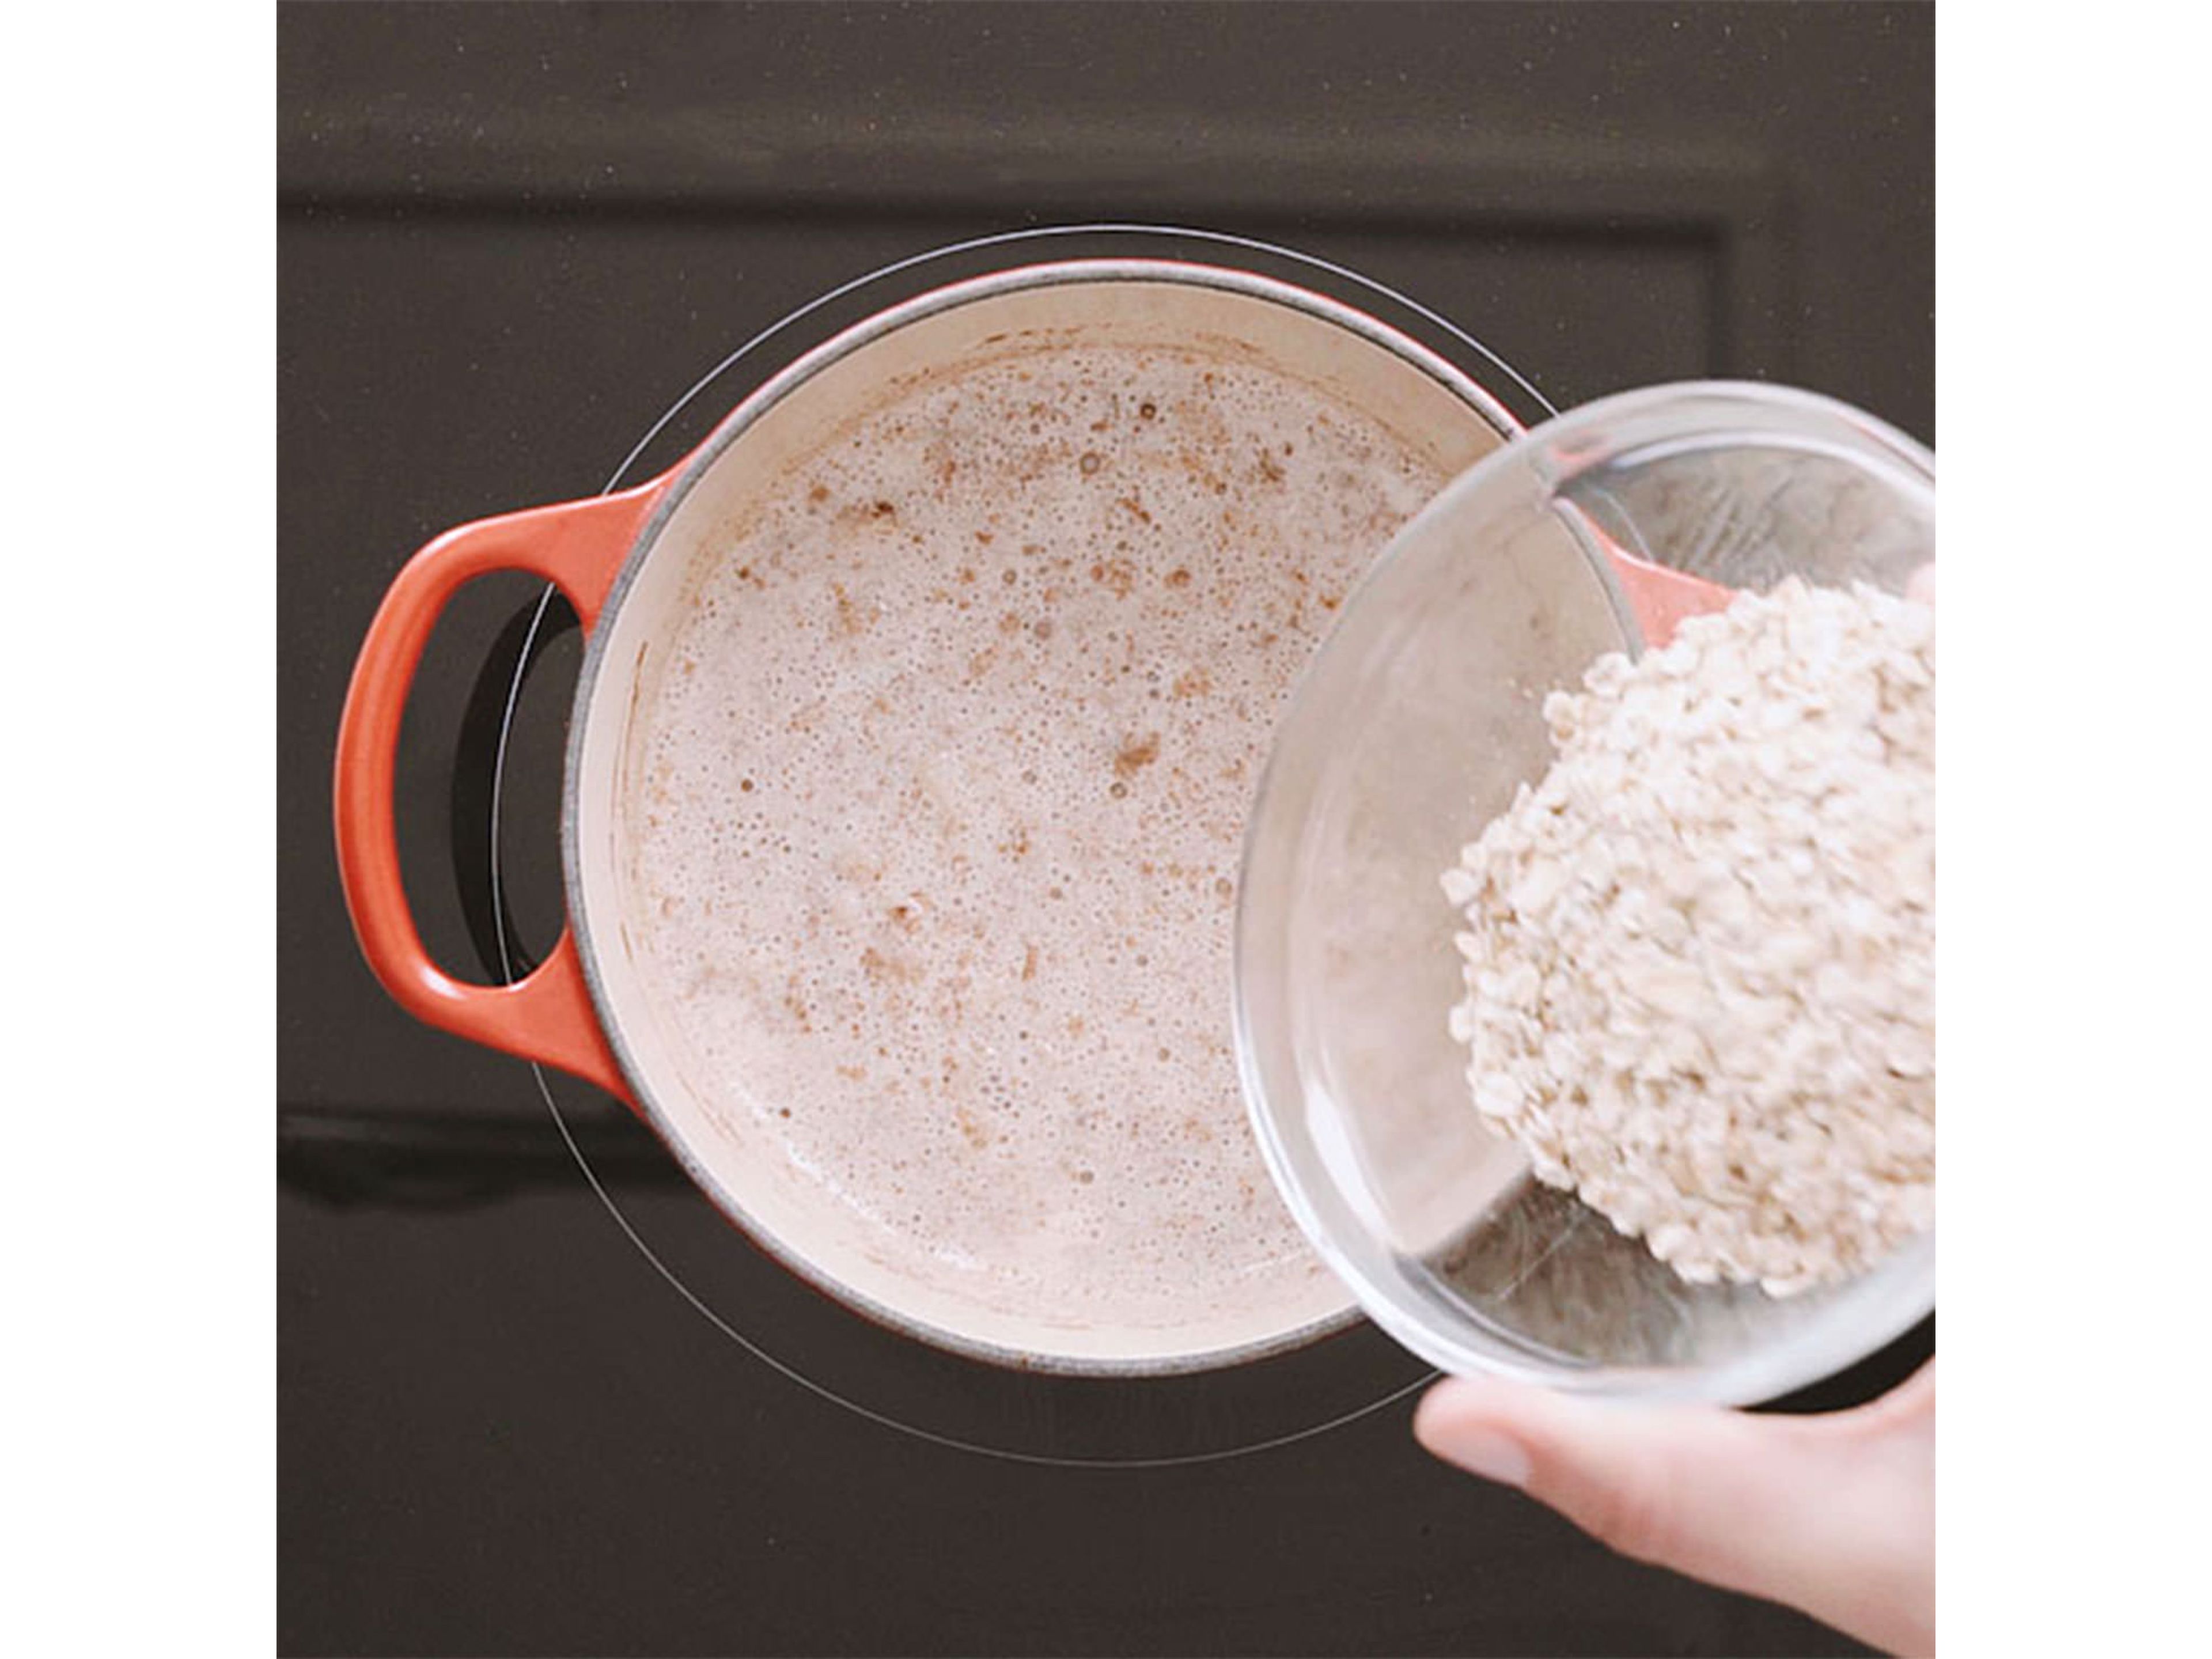 Stir in oats and cook for approx. 1 – 2 min., stirring constantly.